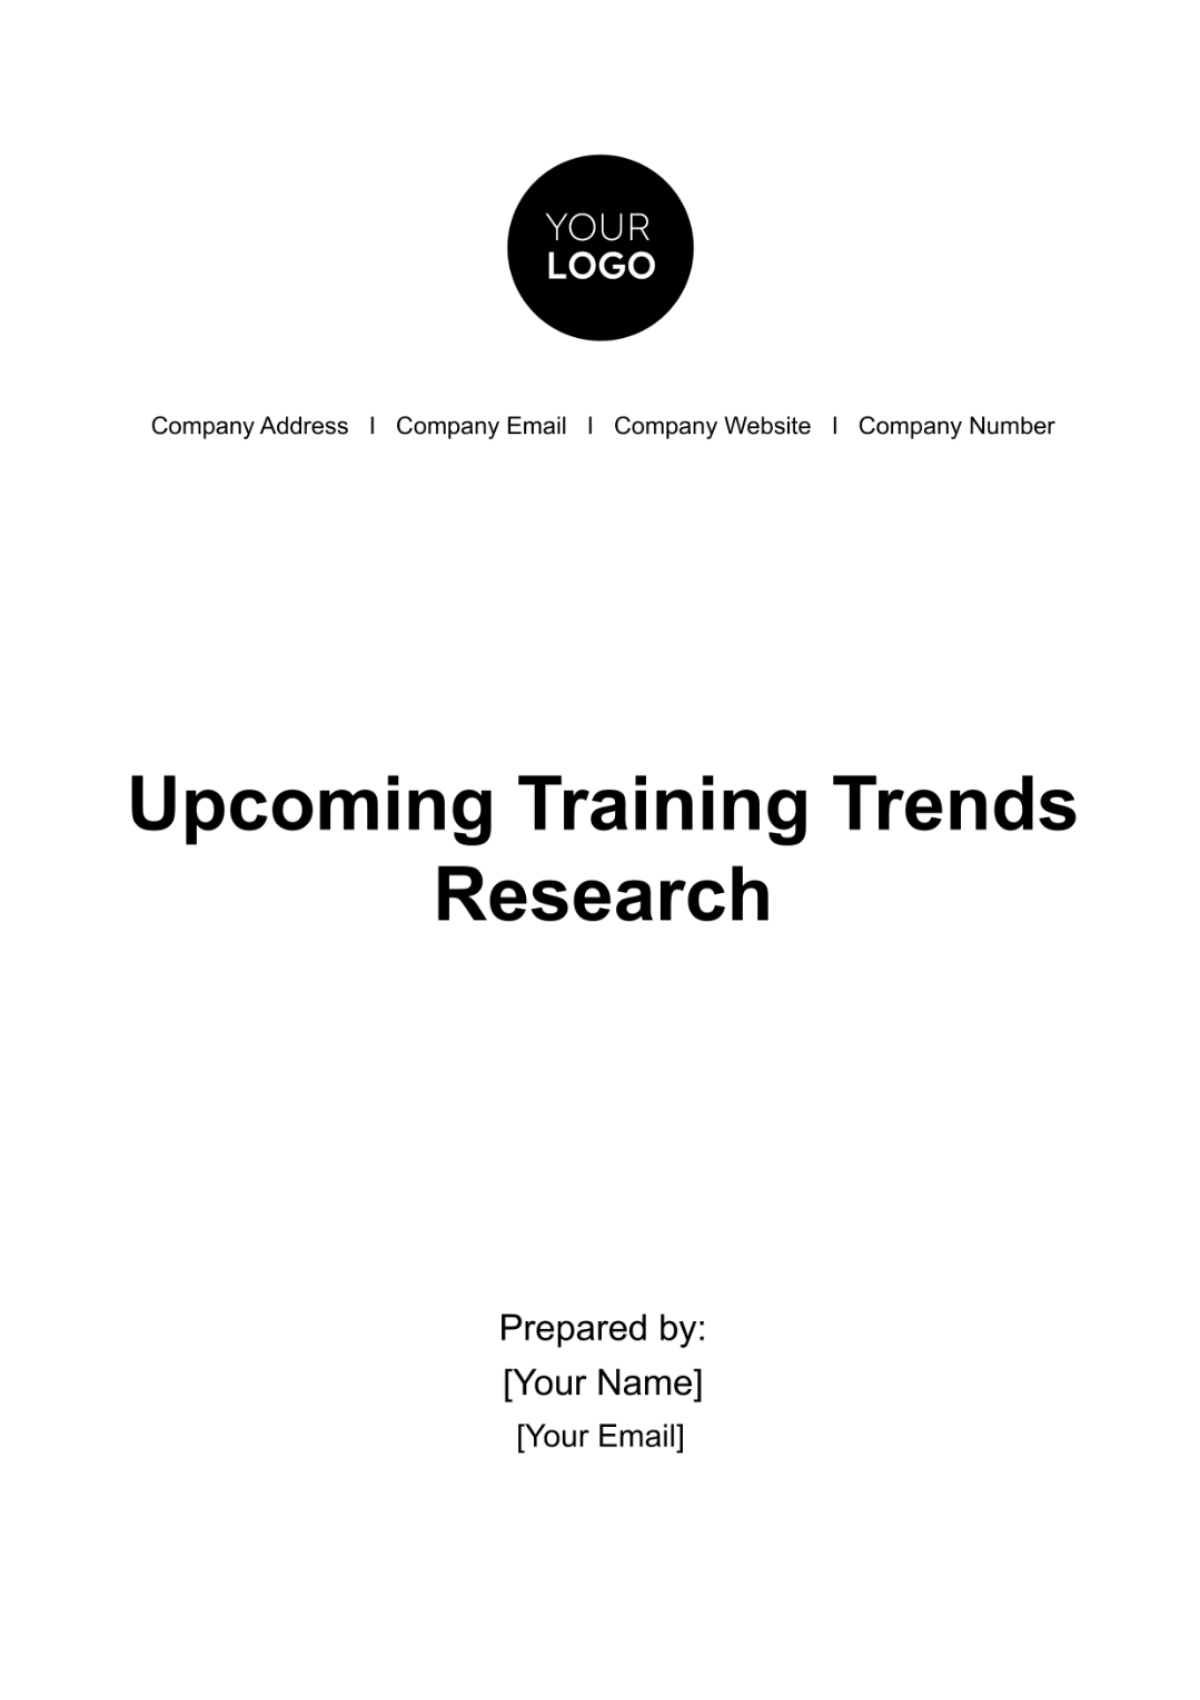 Free Upcoming Training Trends Research HR Template